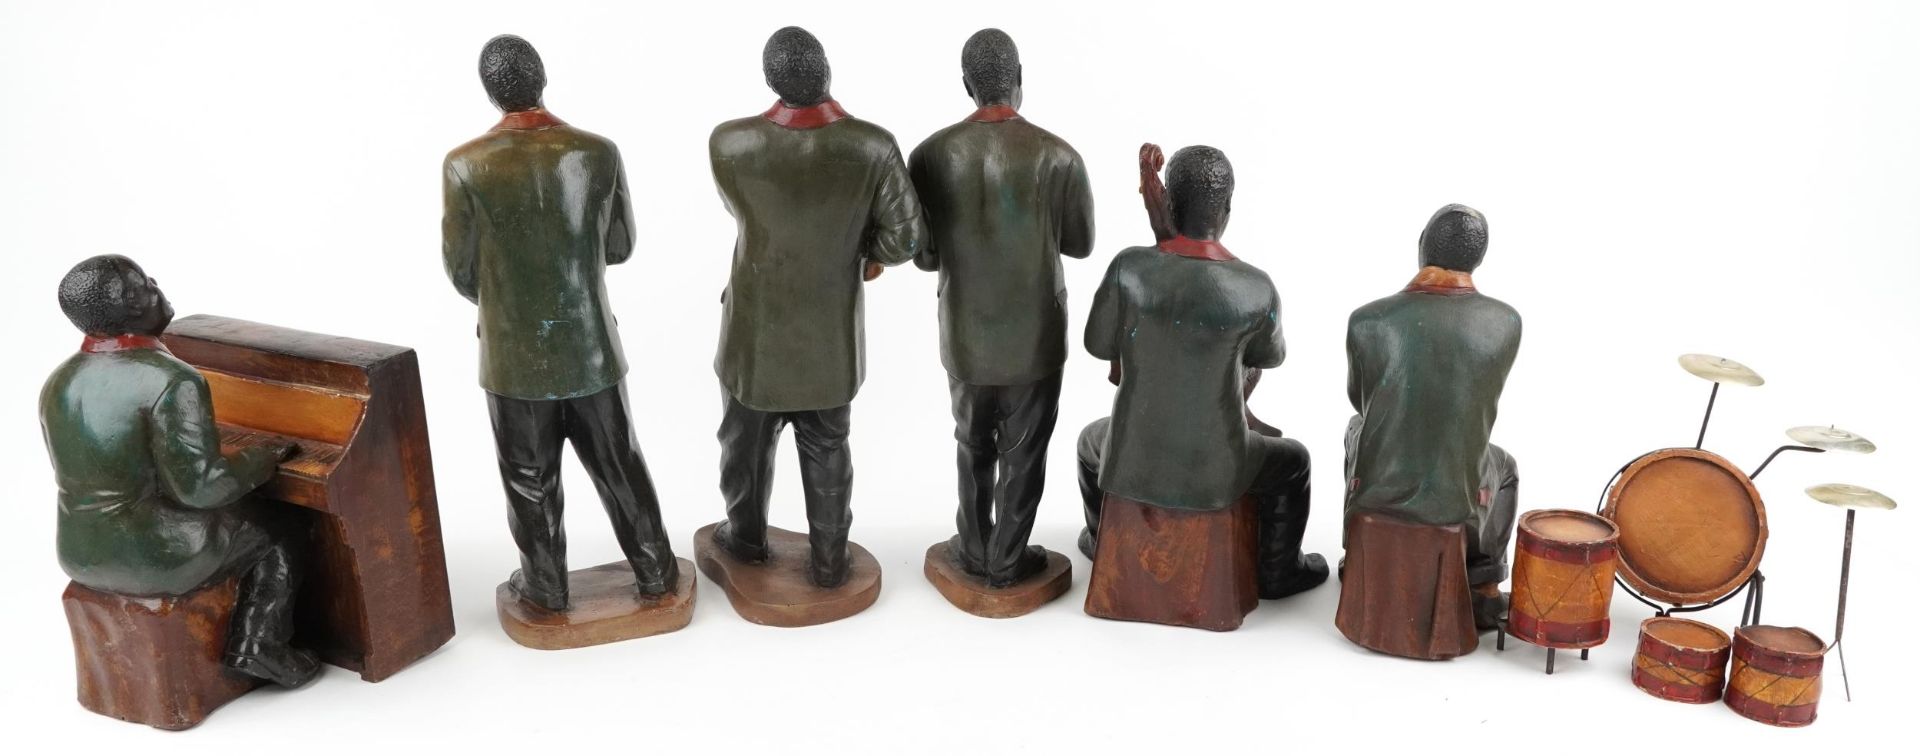 Large vintage hand painted fibreglass five piece jazz band including drummer and pianist, 55cm high - Image 2 of 2